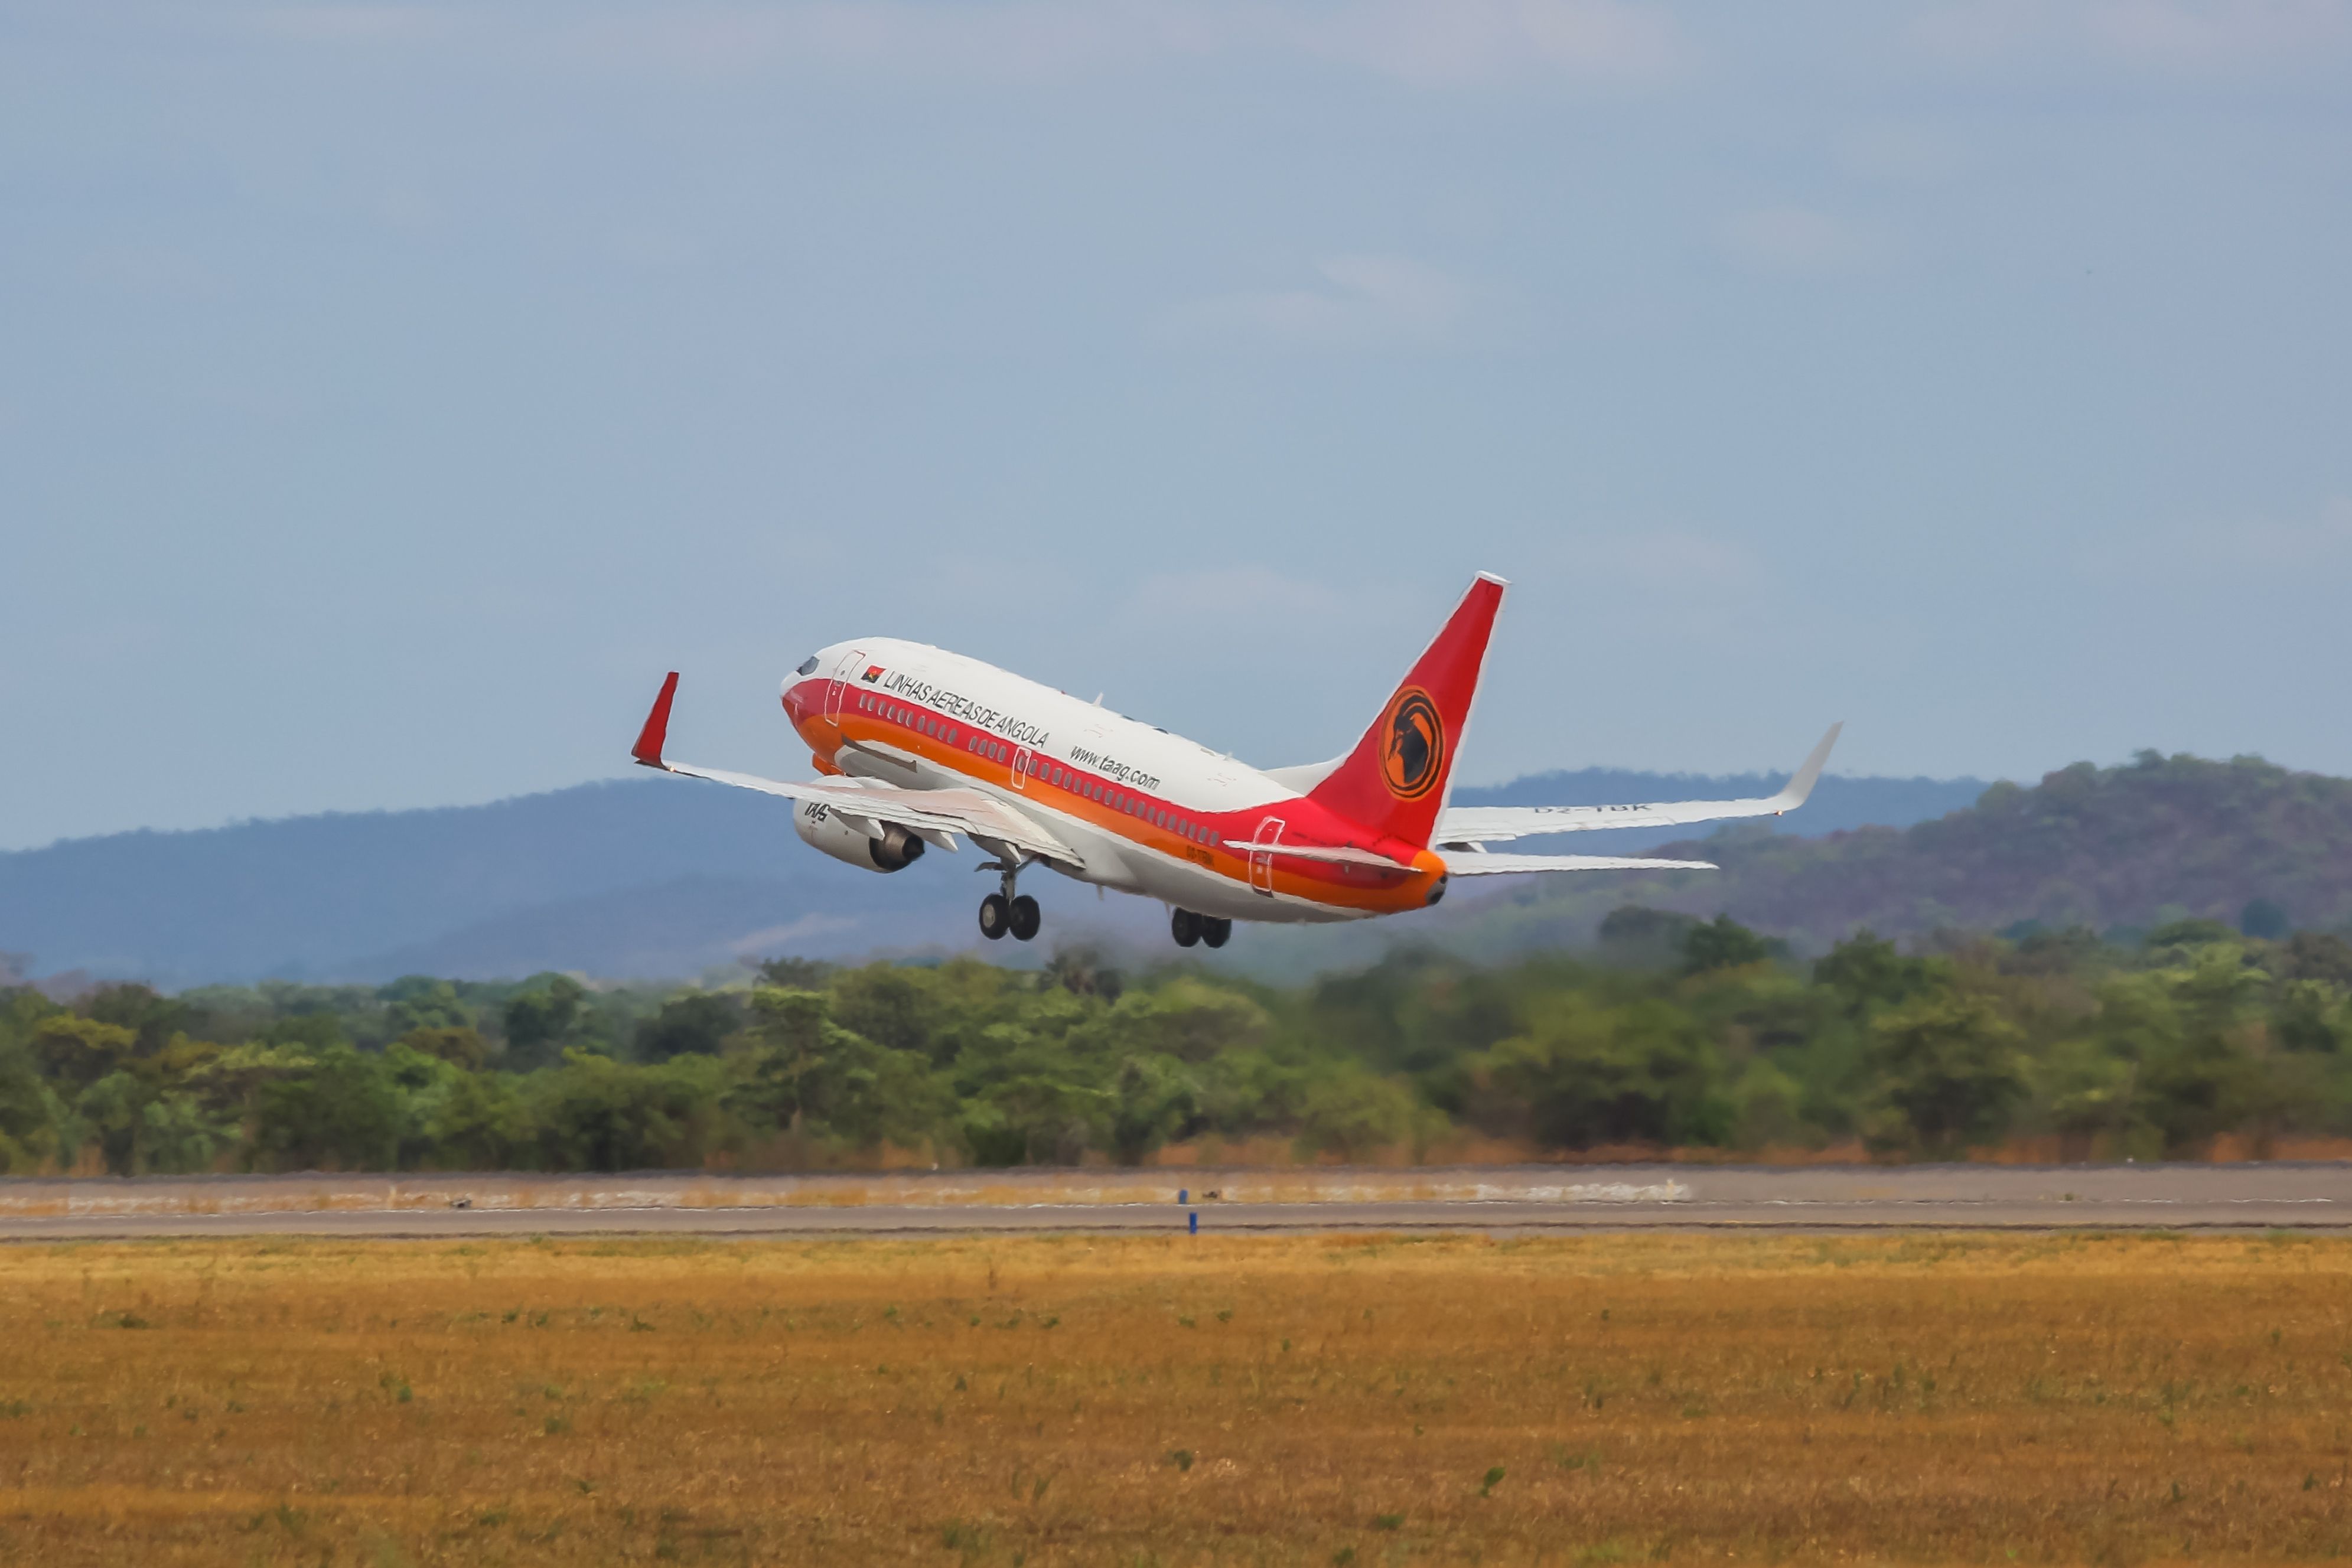 TAAG Angola Airlines Boeing 737-700 taking off